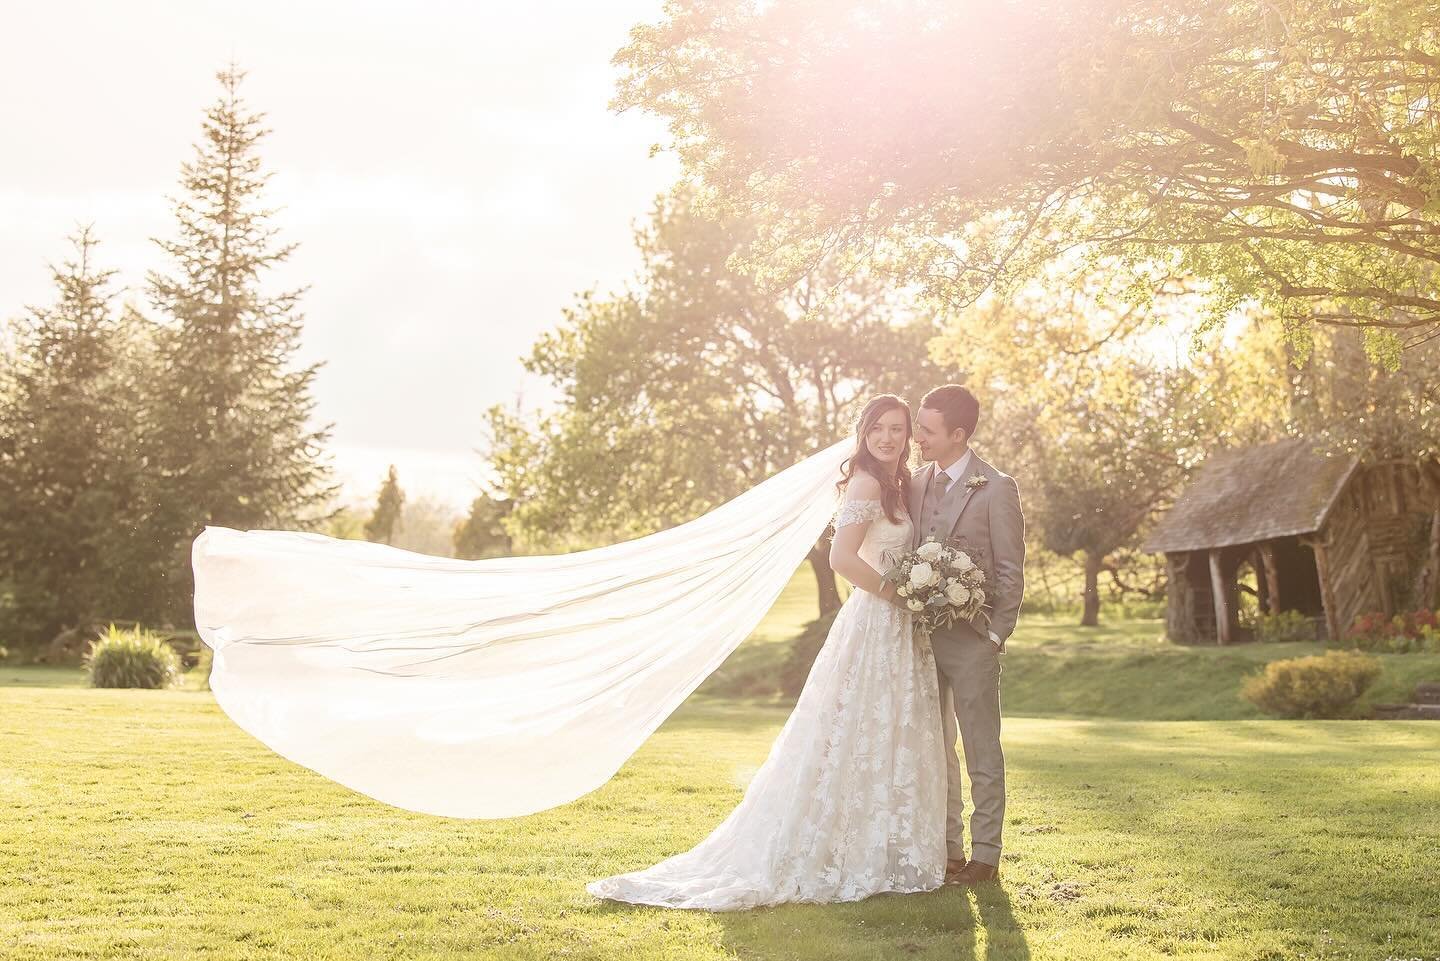 Kathryn and Ben&rsquo;s wedding on Saturday was the epitome of Spring&rsquo;s delicate beauty! 💗 Blossom aplenty at The Ravenswood; a venue that&rsquo;s a match made in heaven for any couple dreaming of beautiful grounds to wander. And certainly the